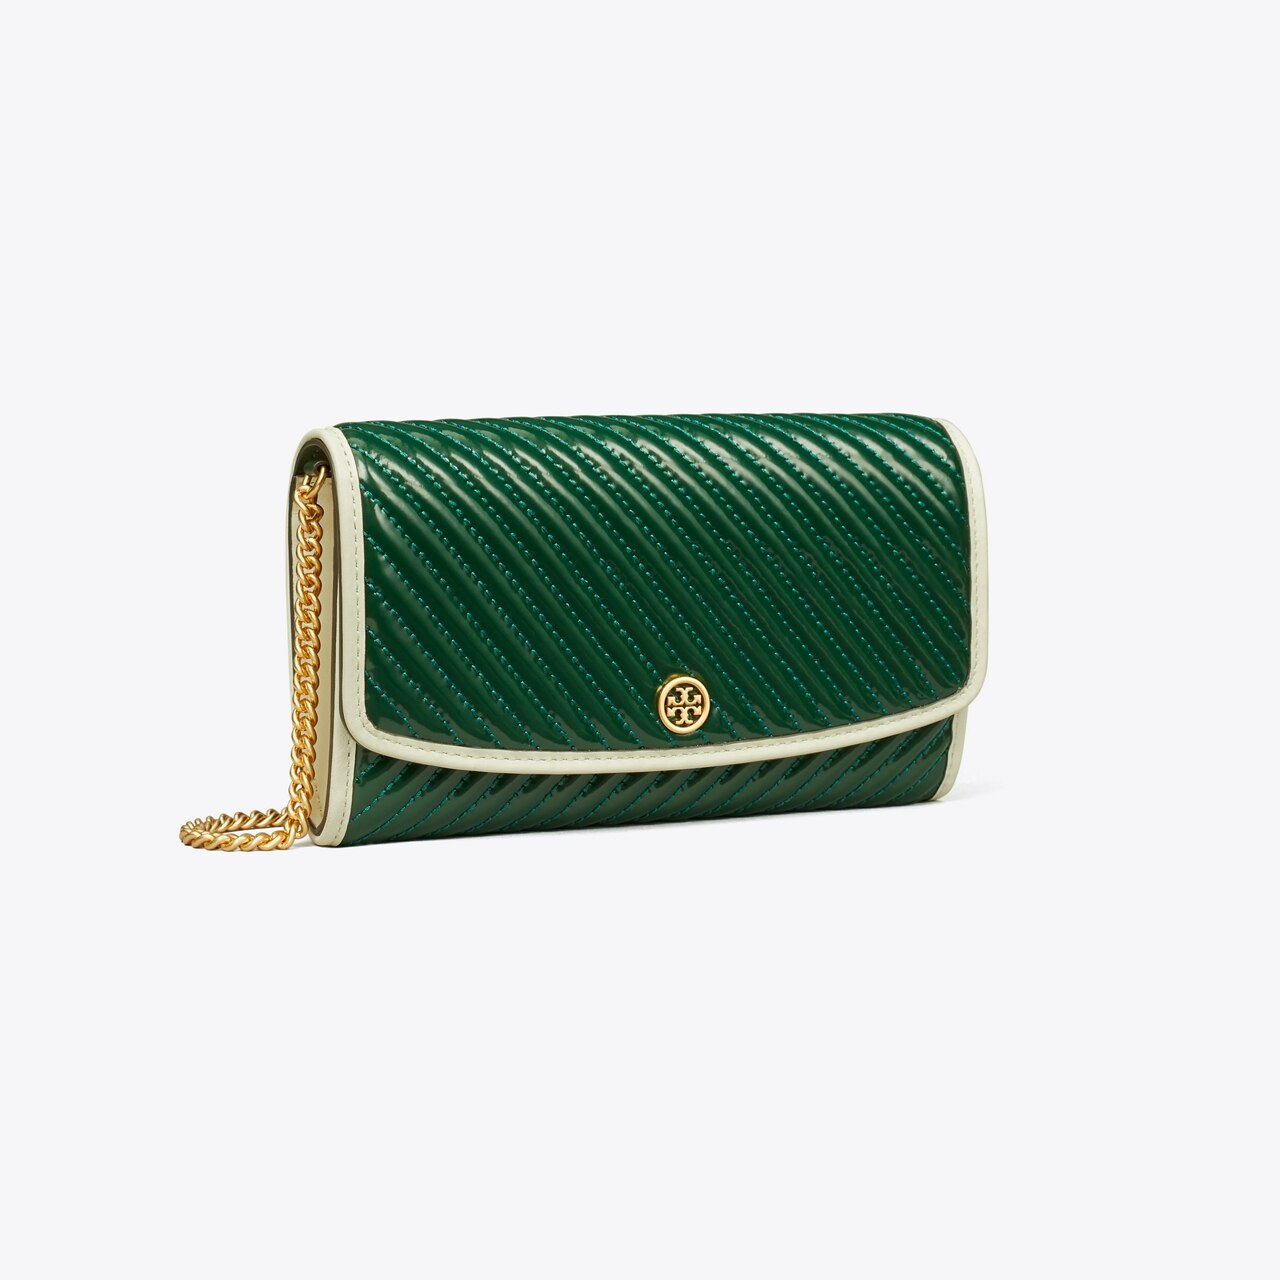 Tory Burch Robinson Chain Leather Wallet